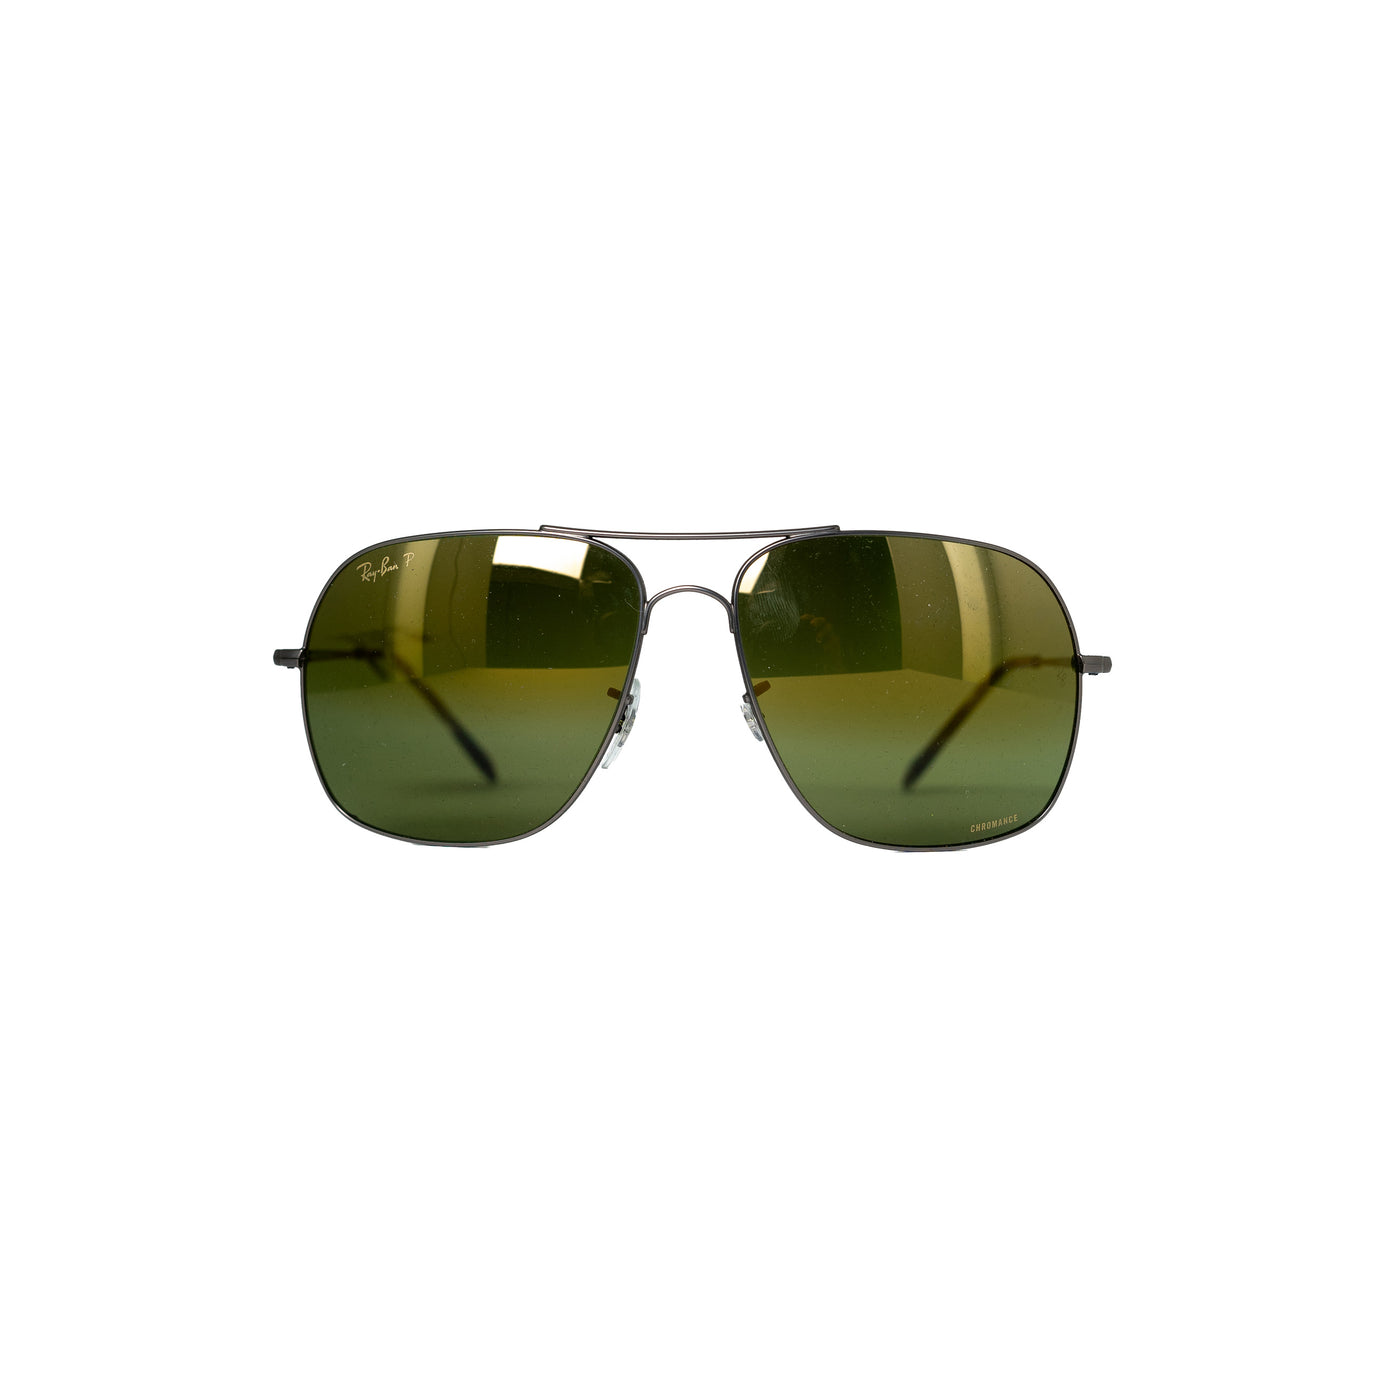 Ray-Ban RB3587CH/029/6O | Sunglasses - Vision Express Optical Philippines